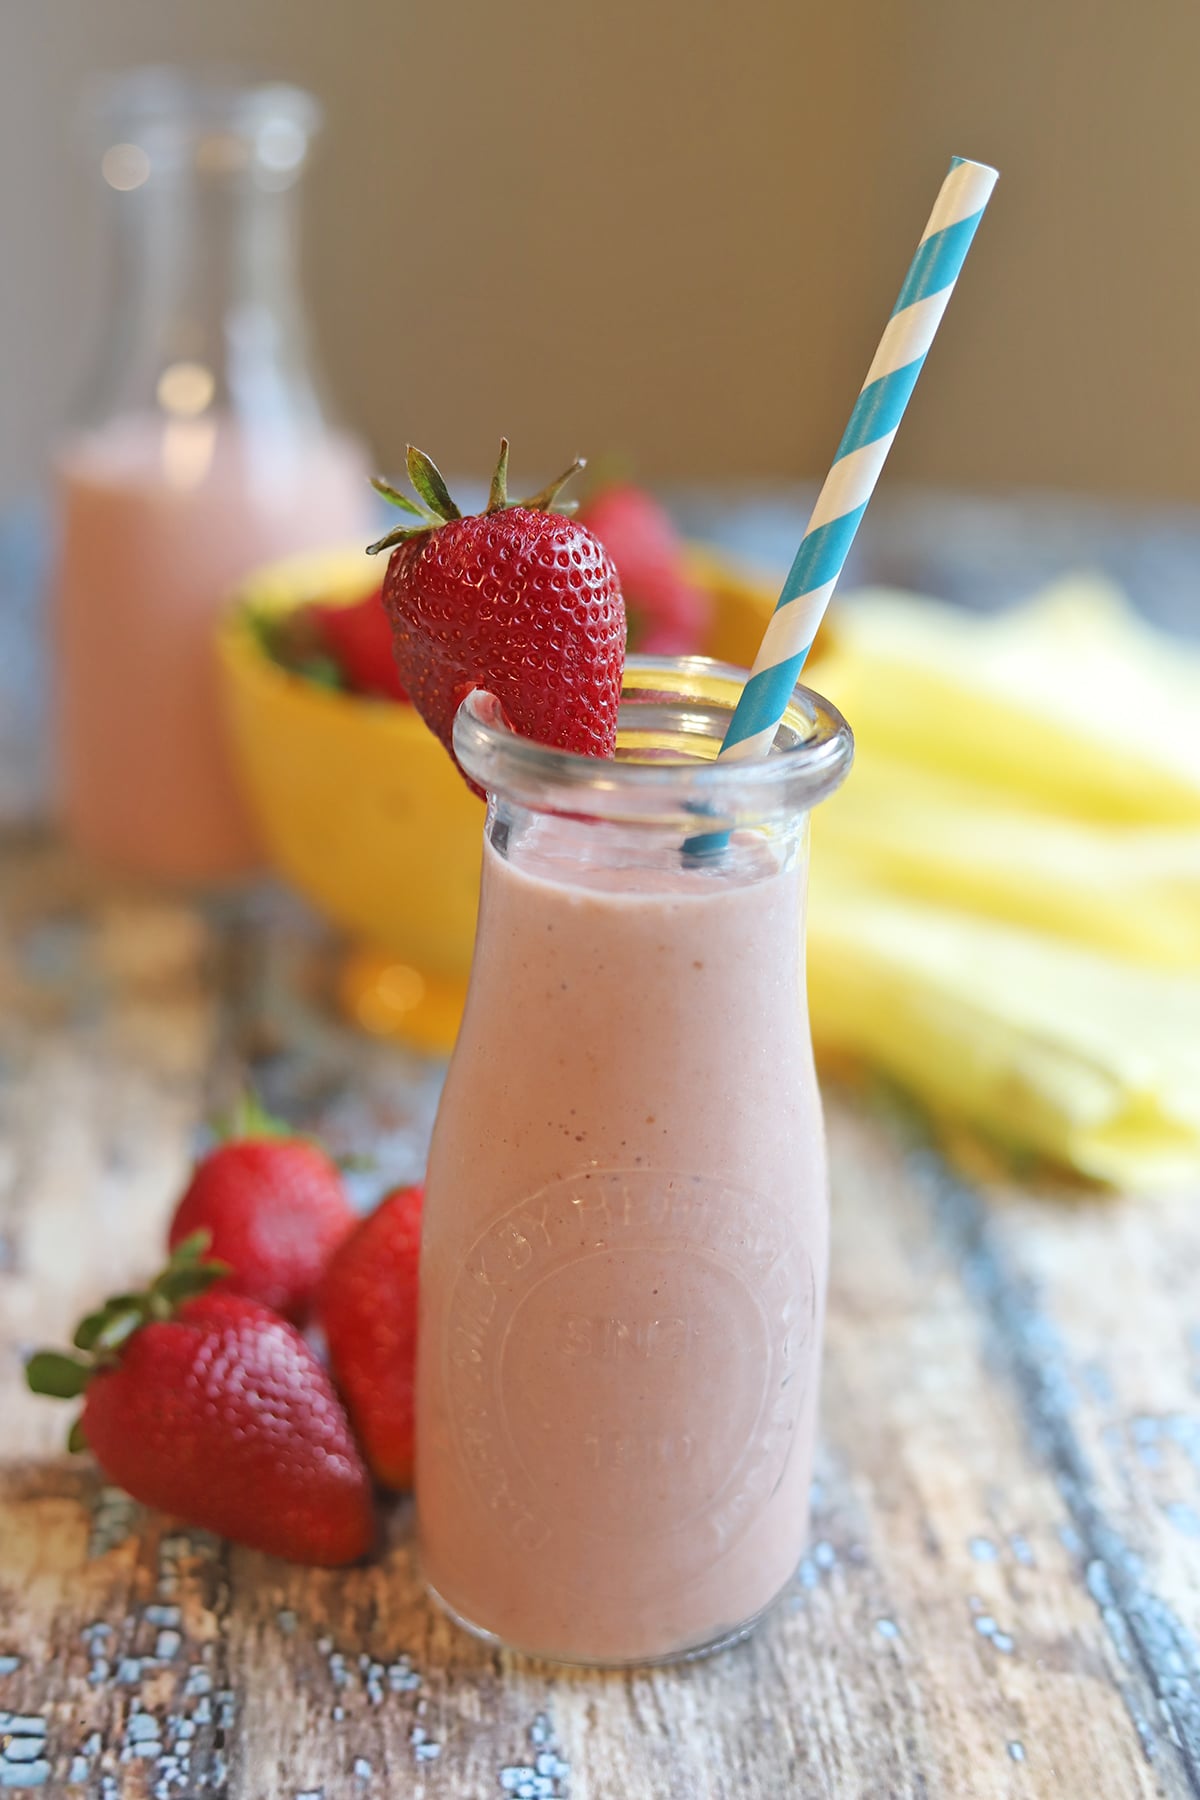 Strawberry milk in tall bottle with straw & strawberries.